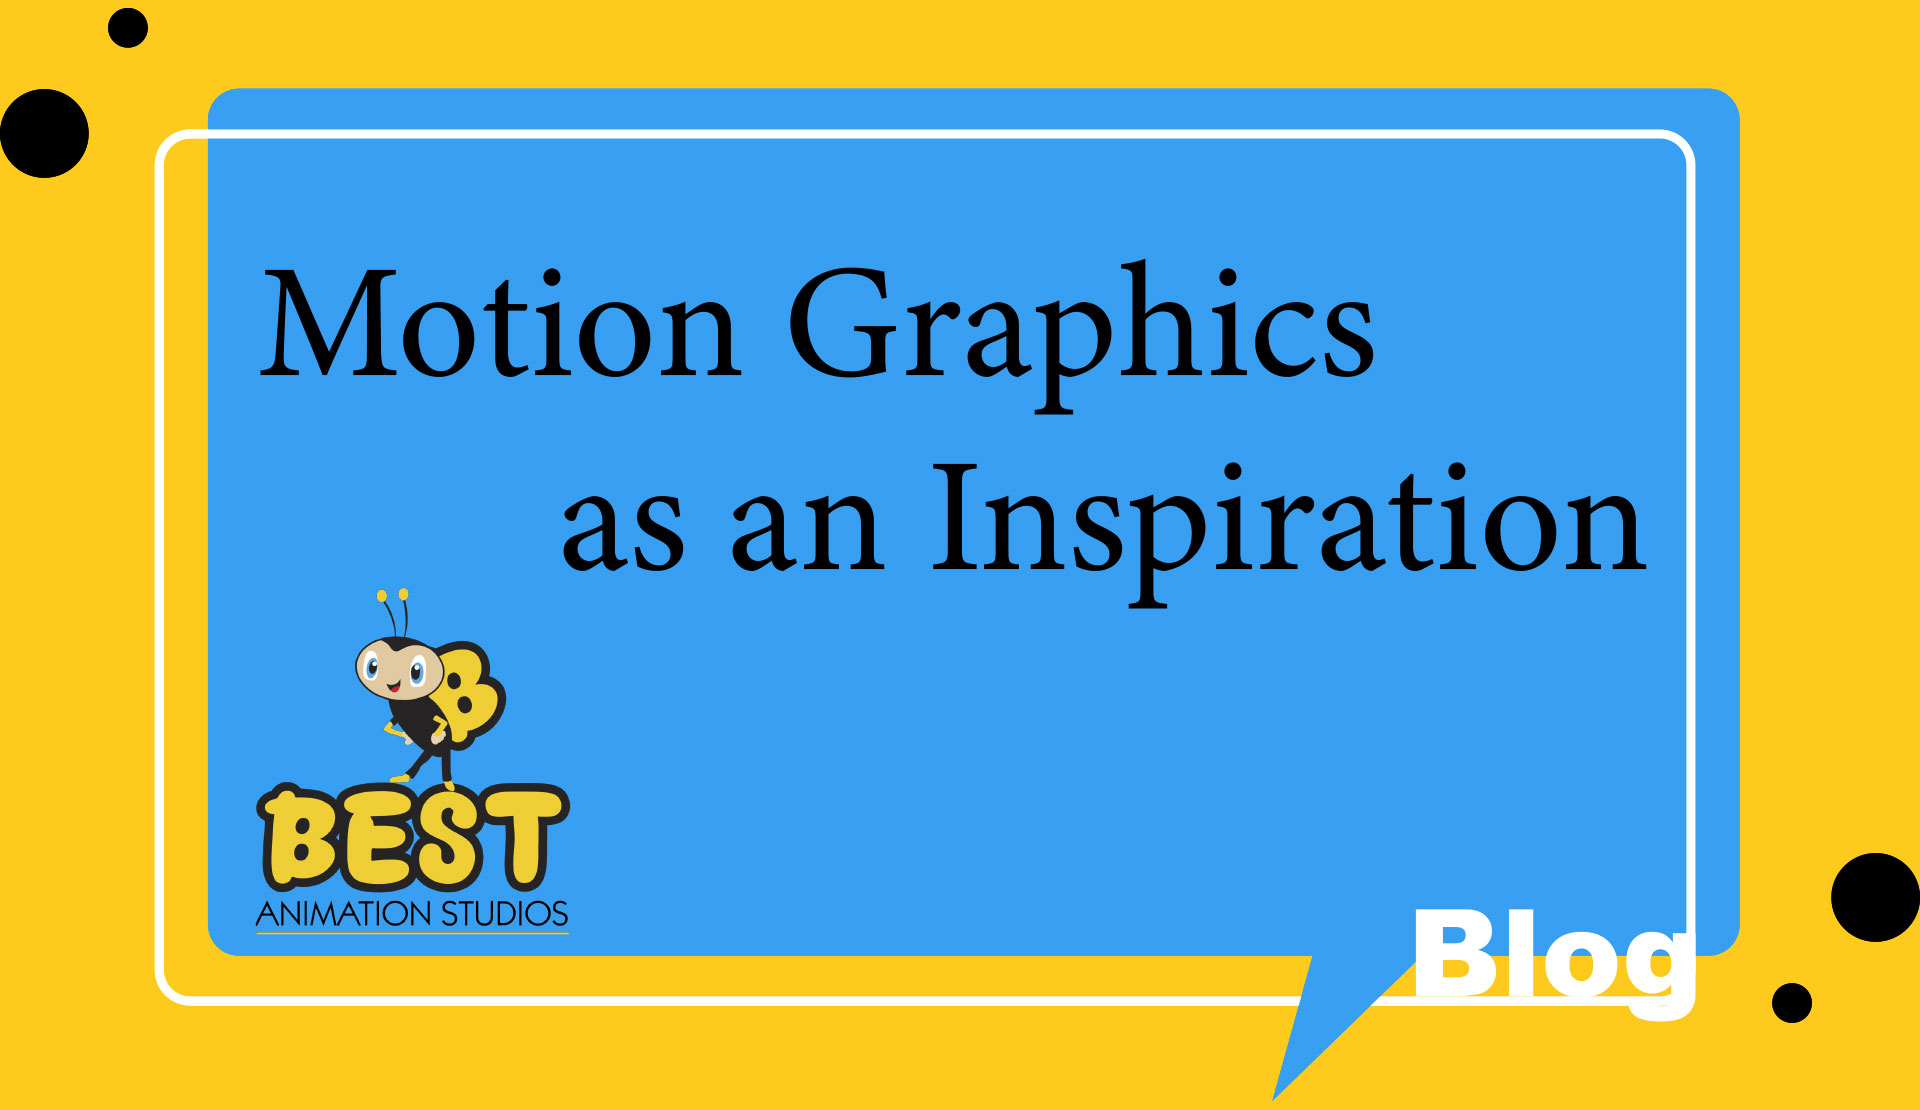 Motion Graphics as an Inspiration